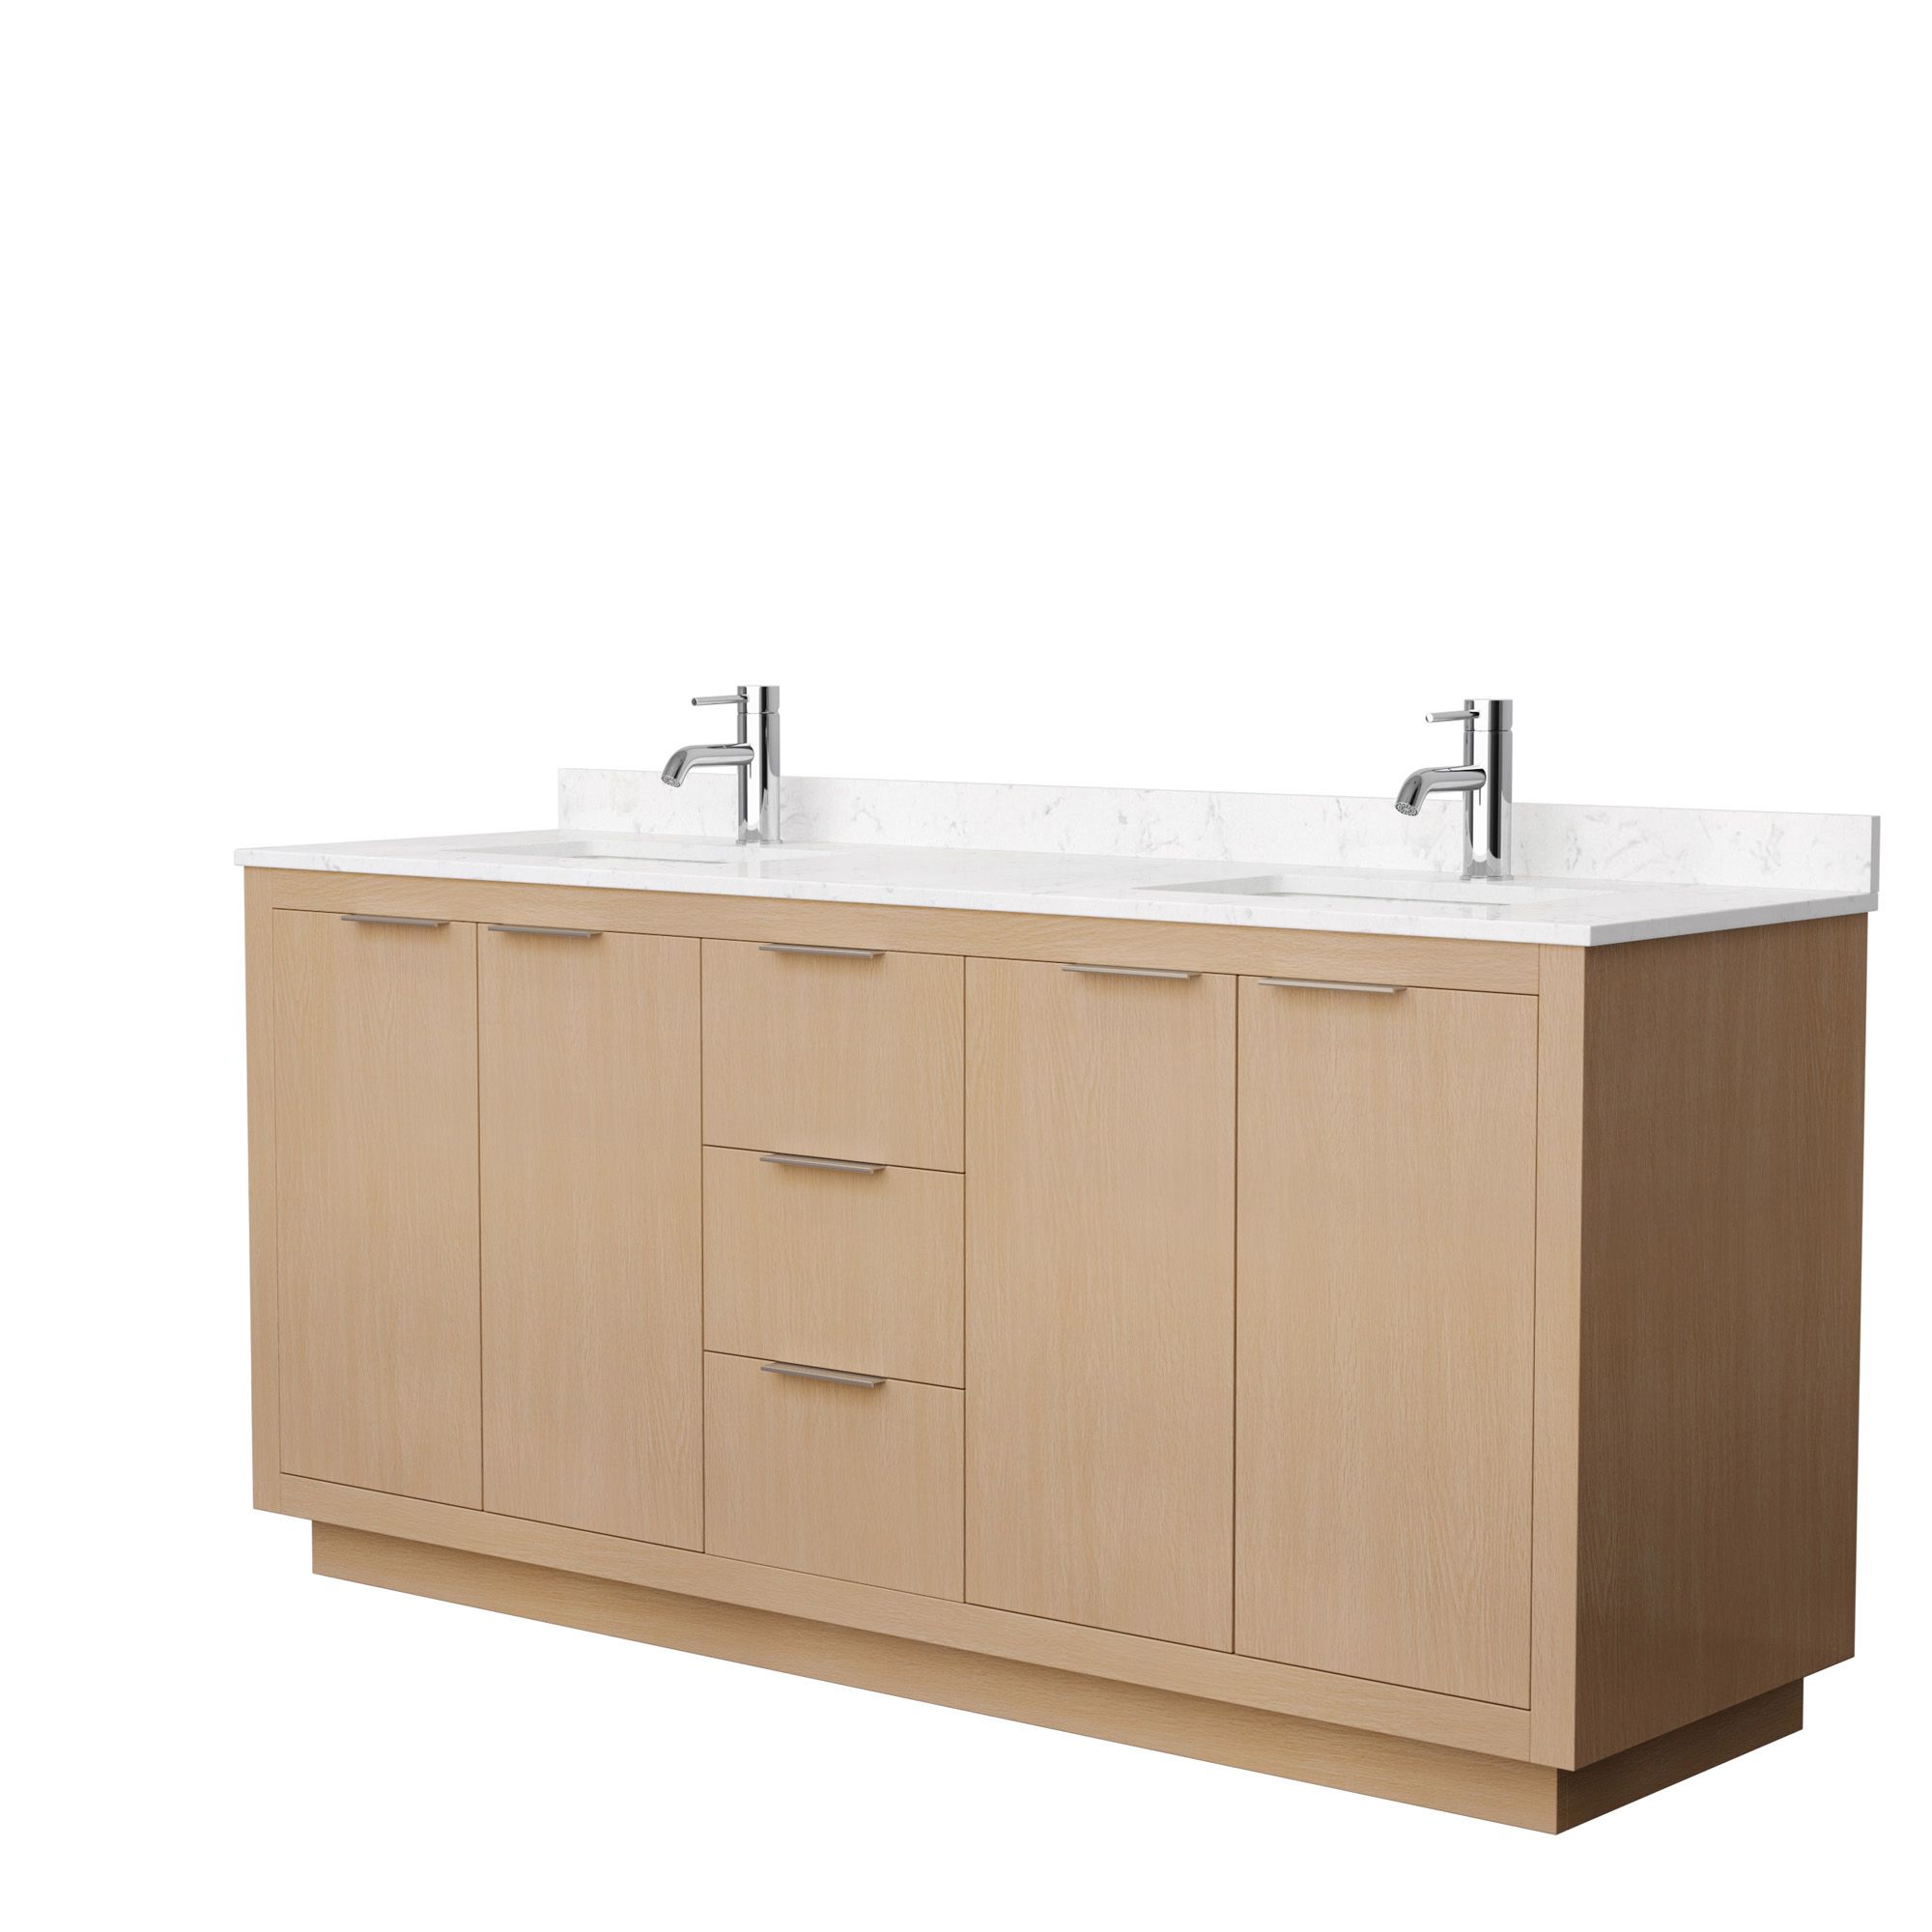 72" Double Bathroom Vanity in Light Straw with Countertop and Hardware Options